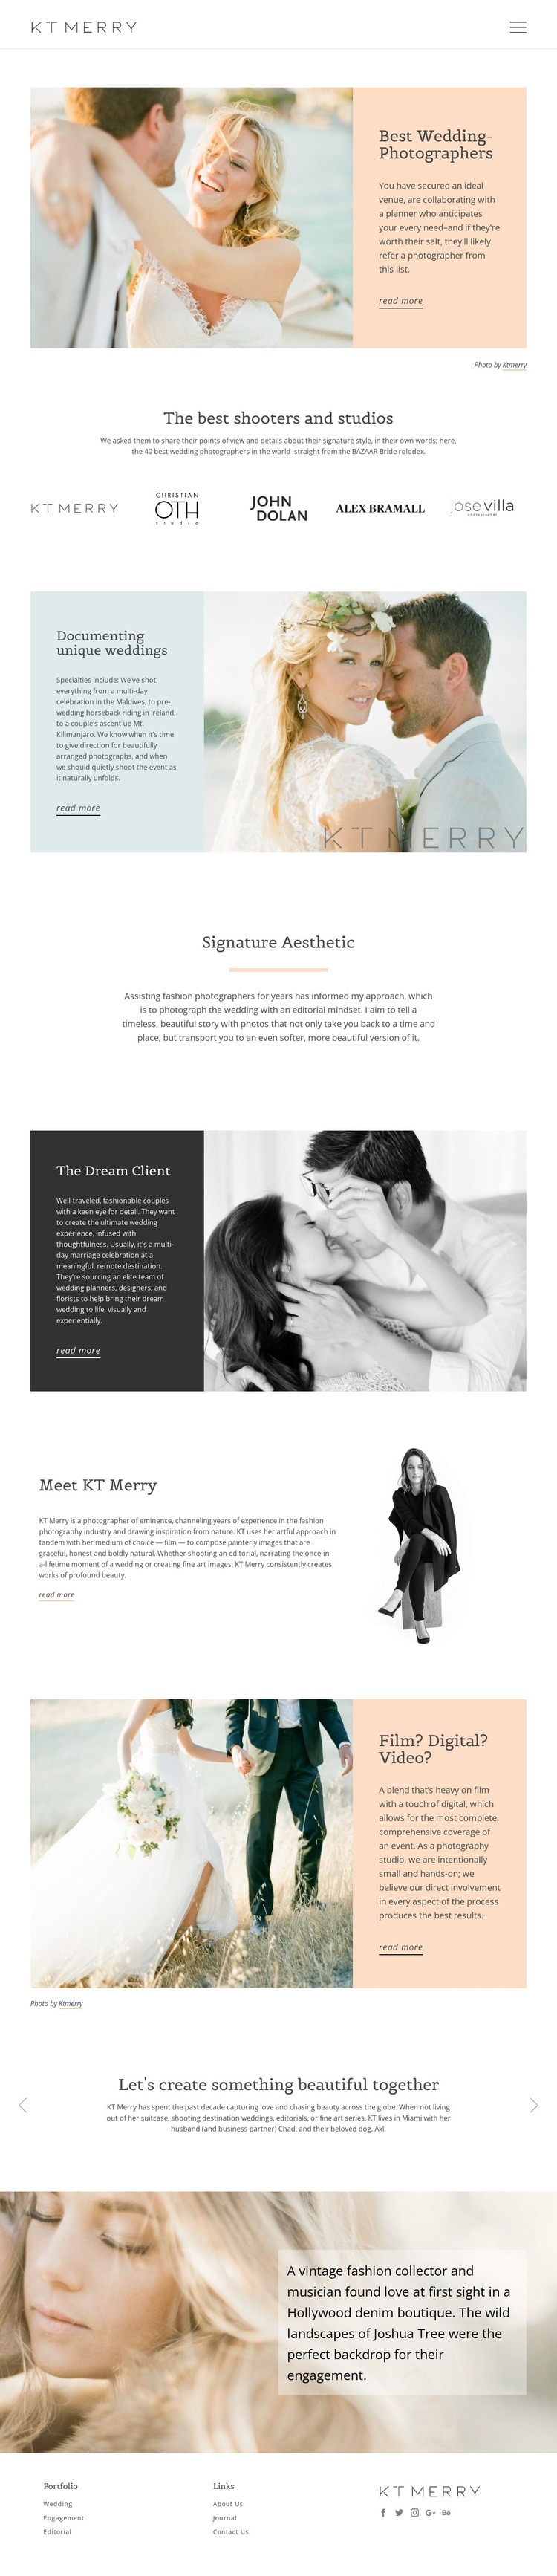 Shooters for special wedding Html Code Example